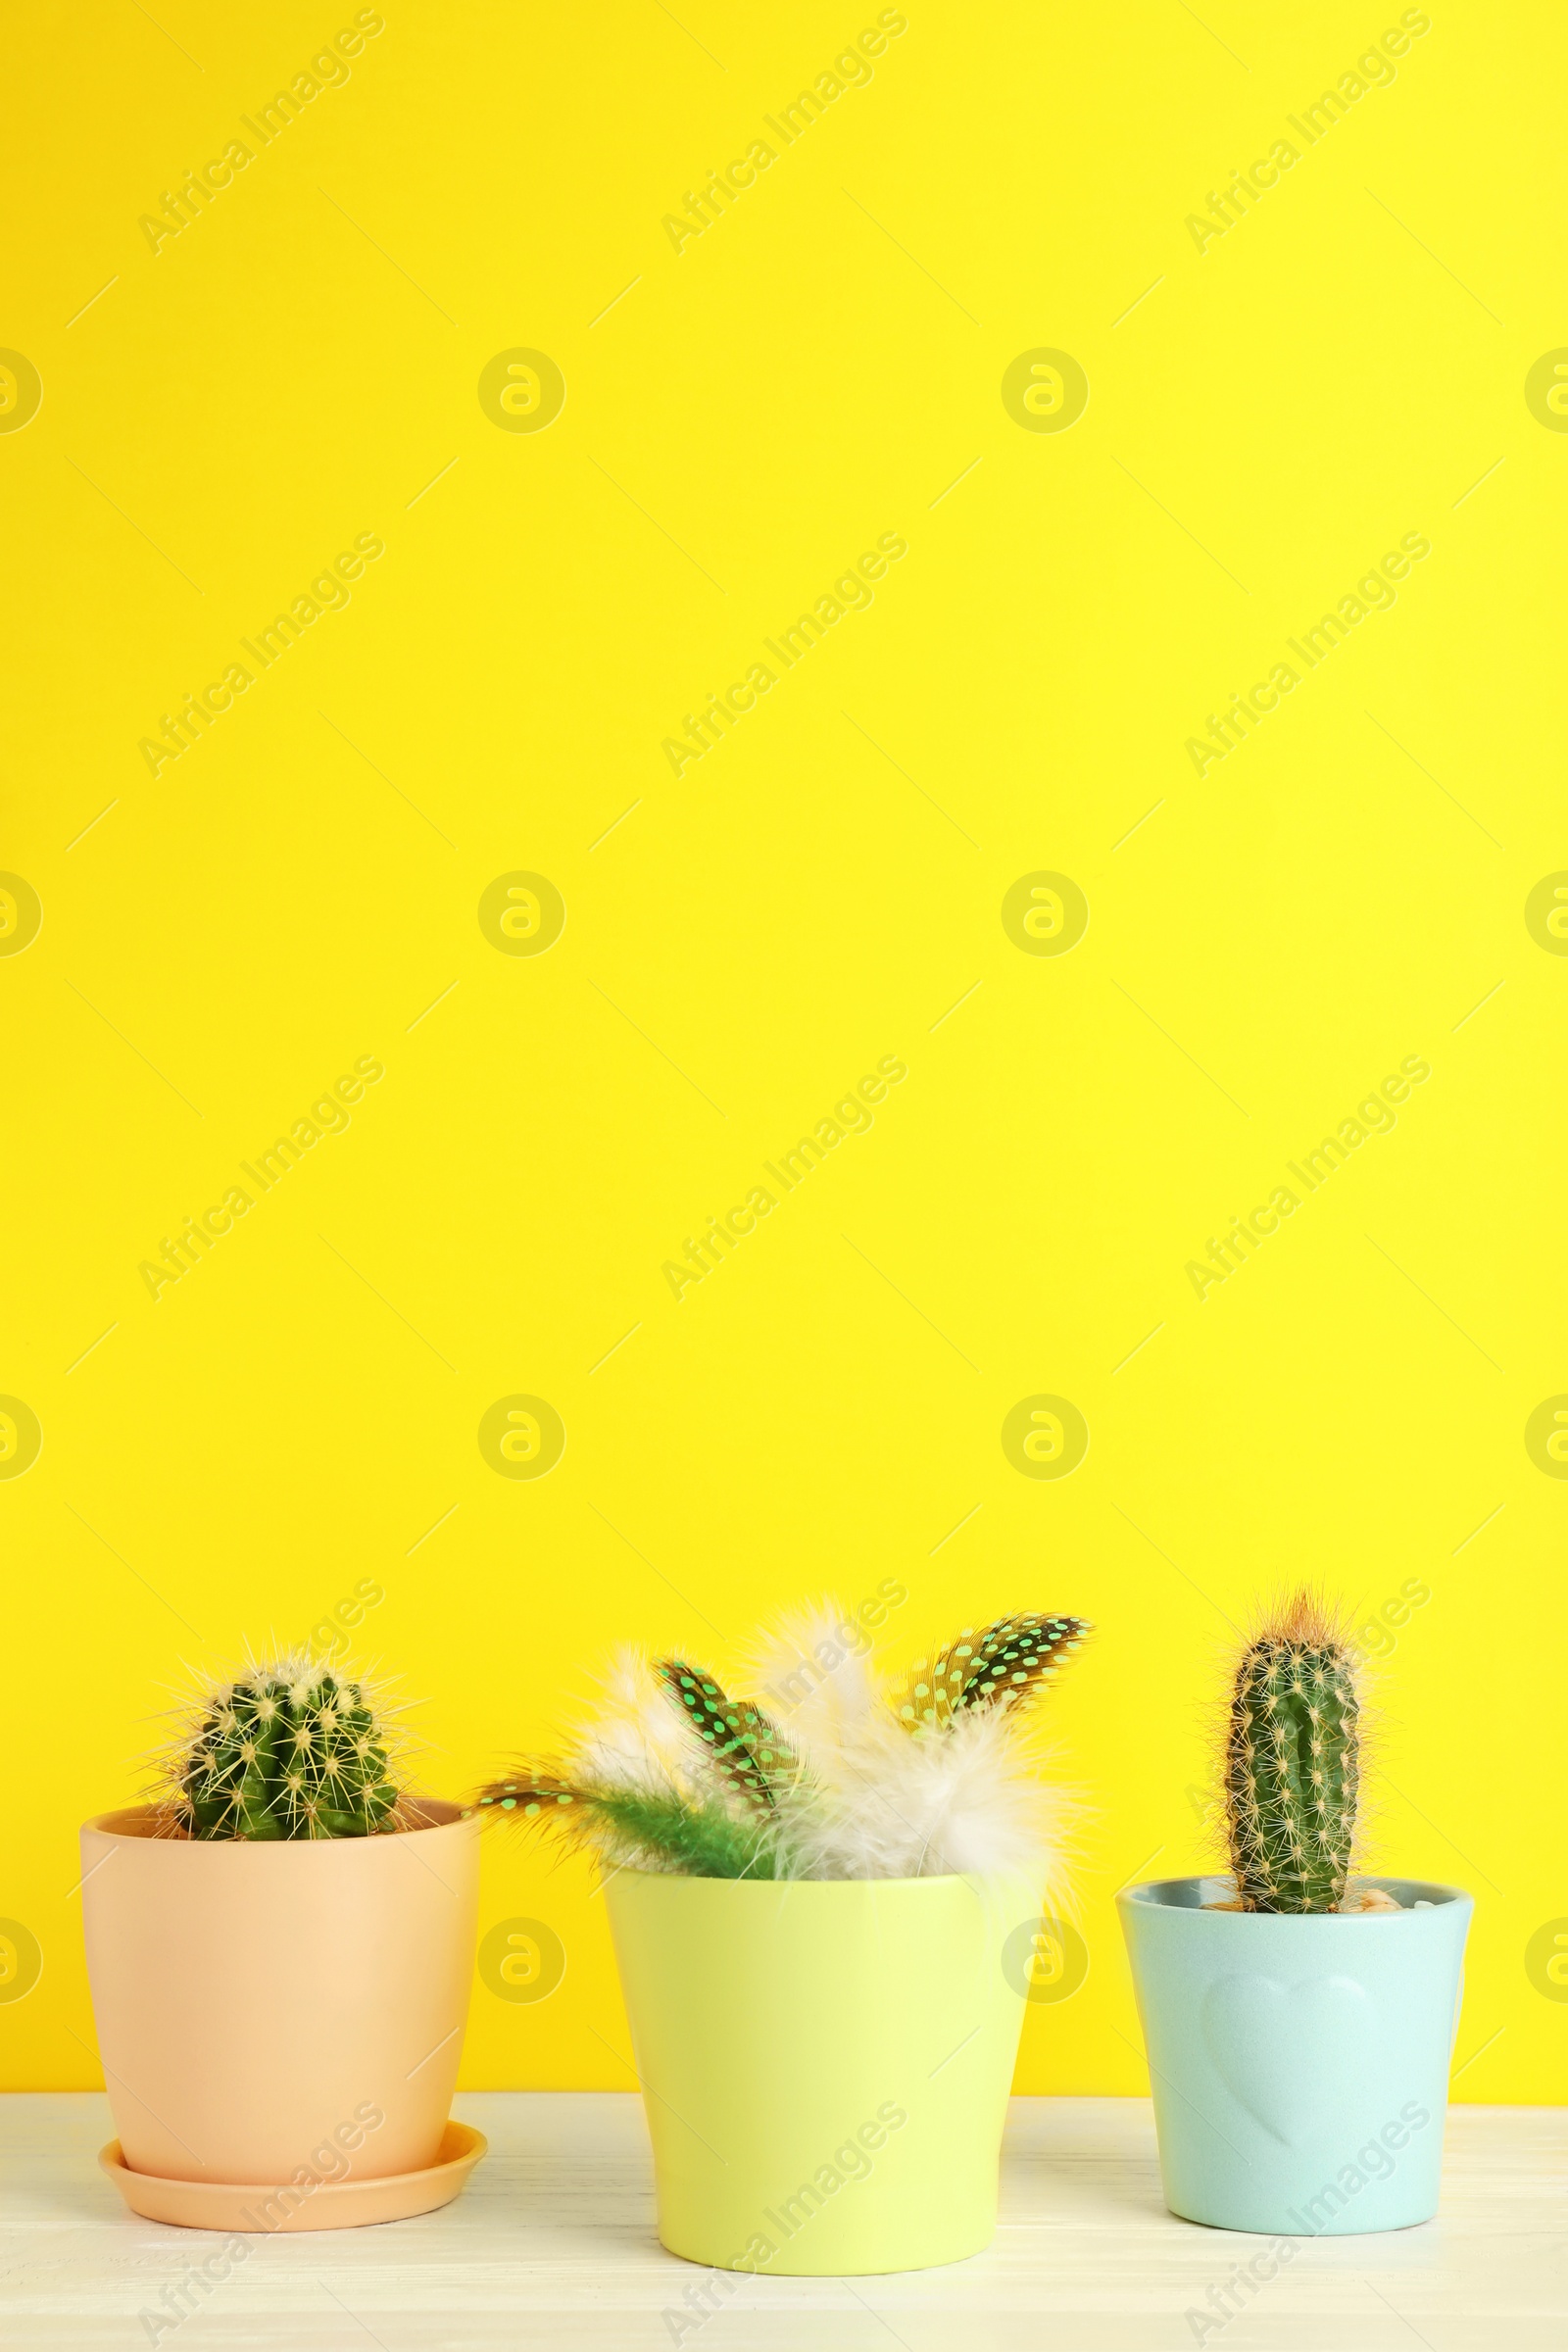 Photo of Pots with cacti and one with feathers on table against color background